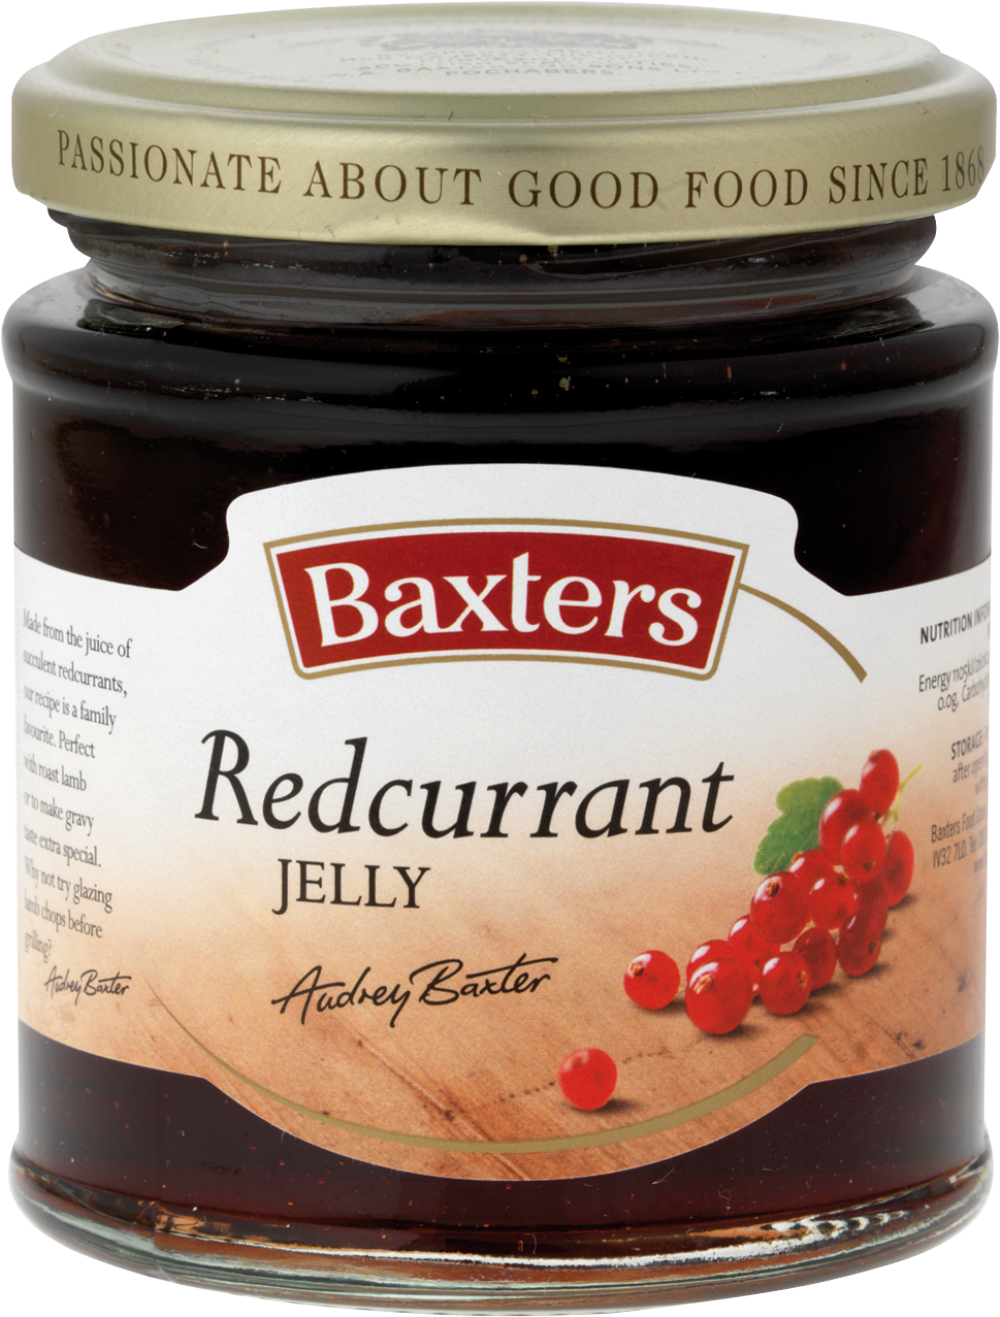 BAXTERS Redcurrant Jelly 210g